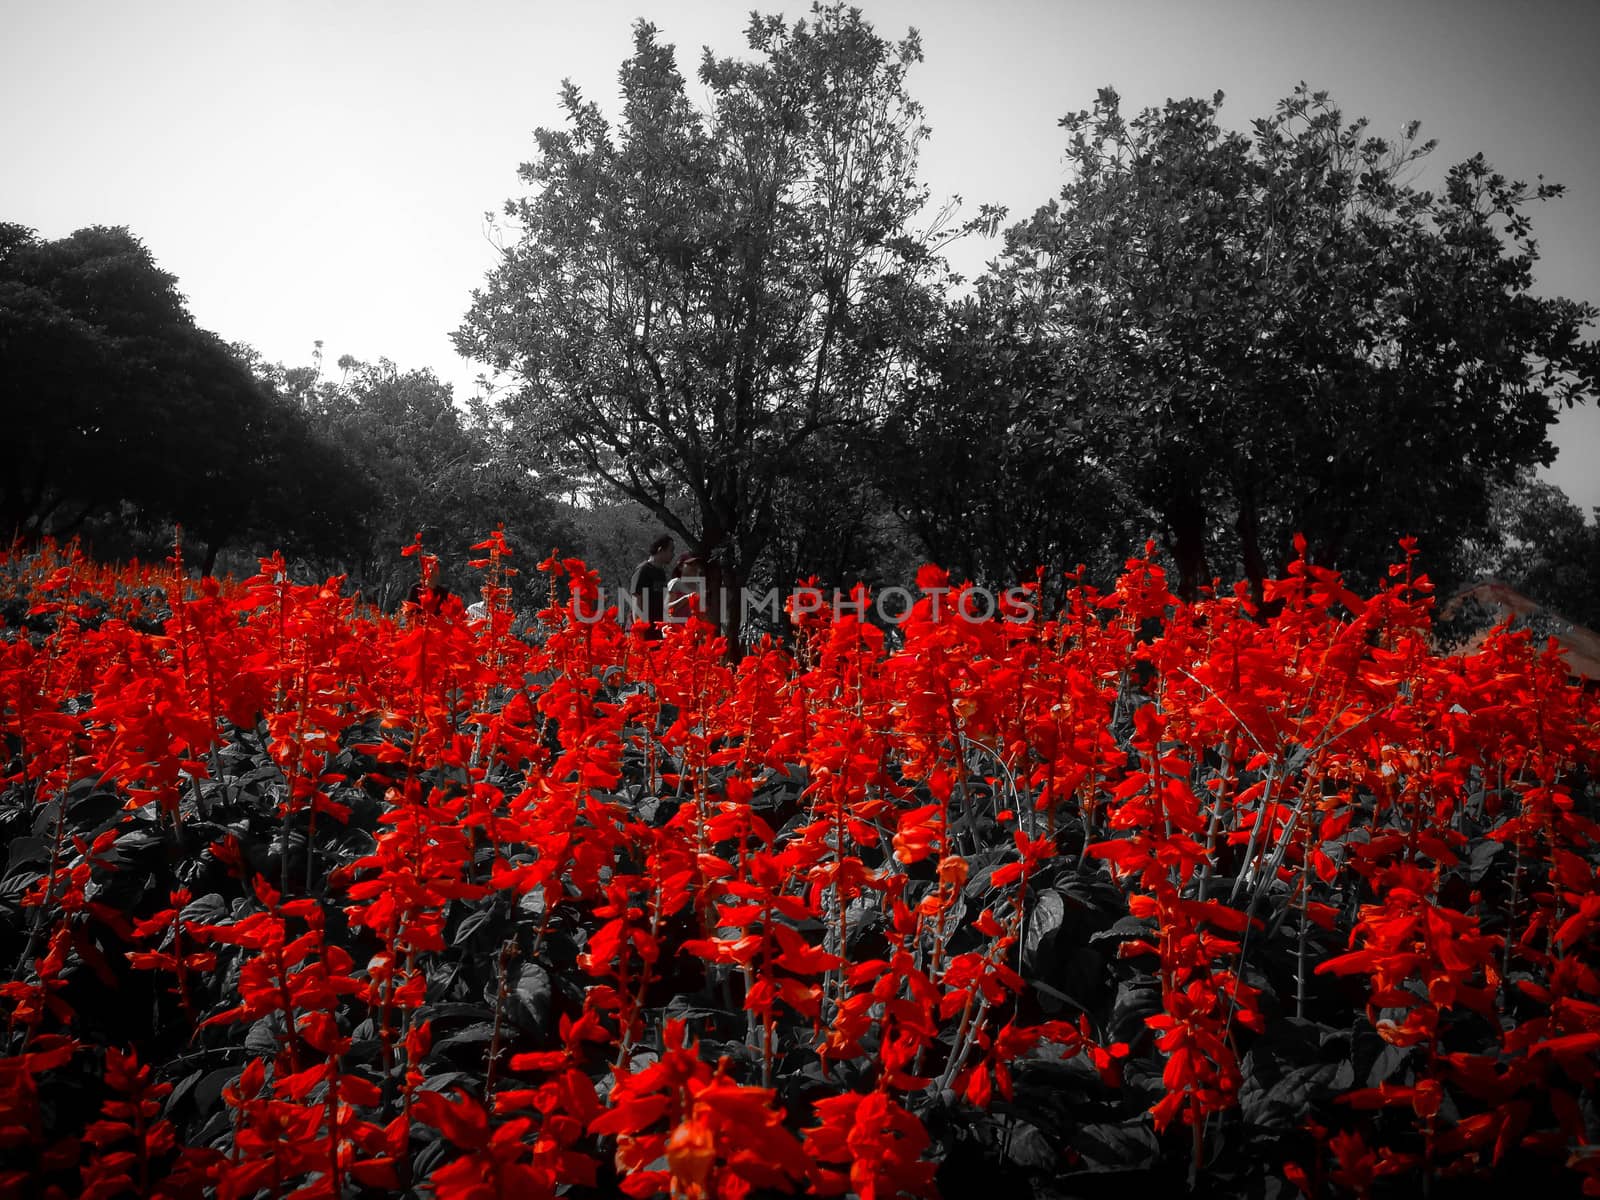 Nature view of red flowers blooming in garden under sunlight